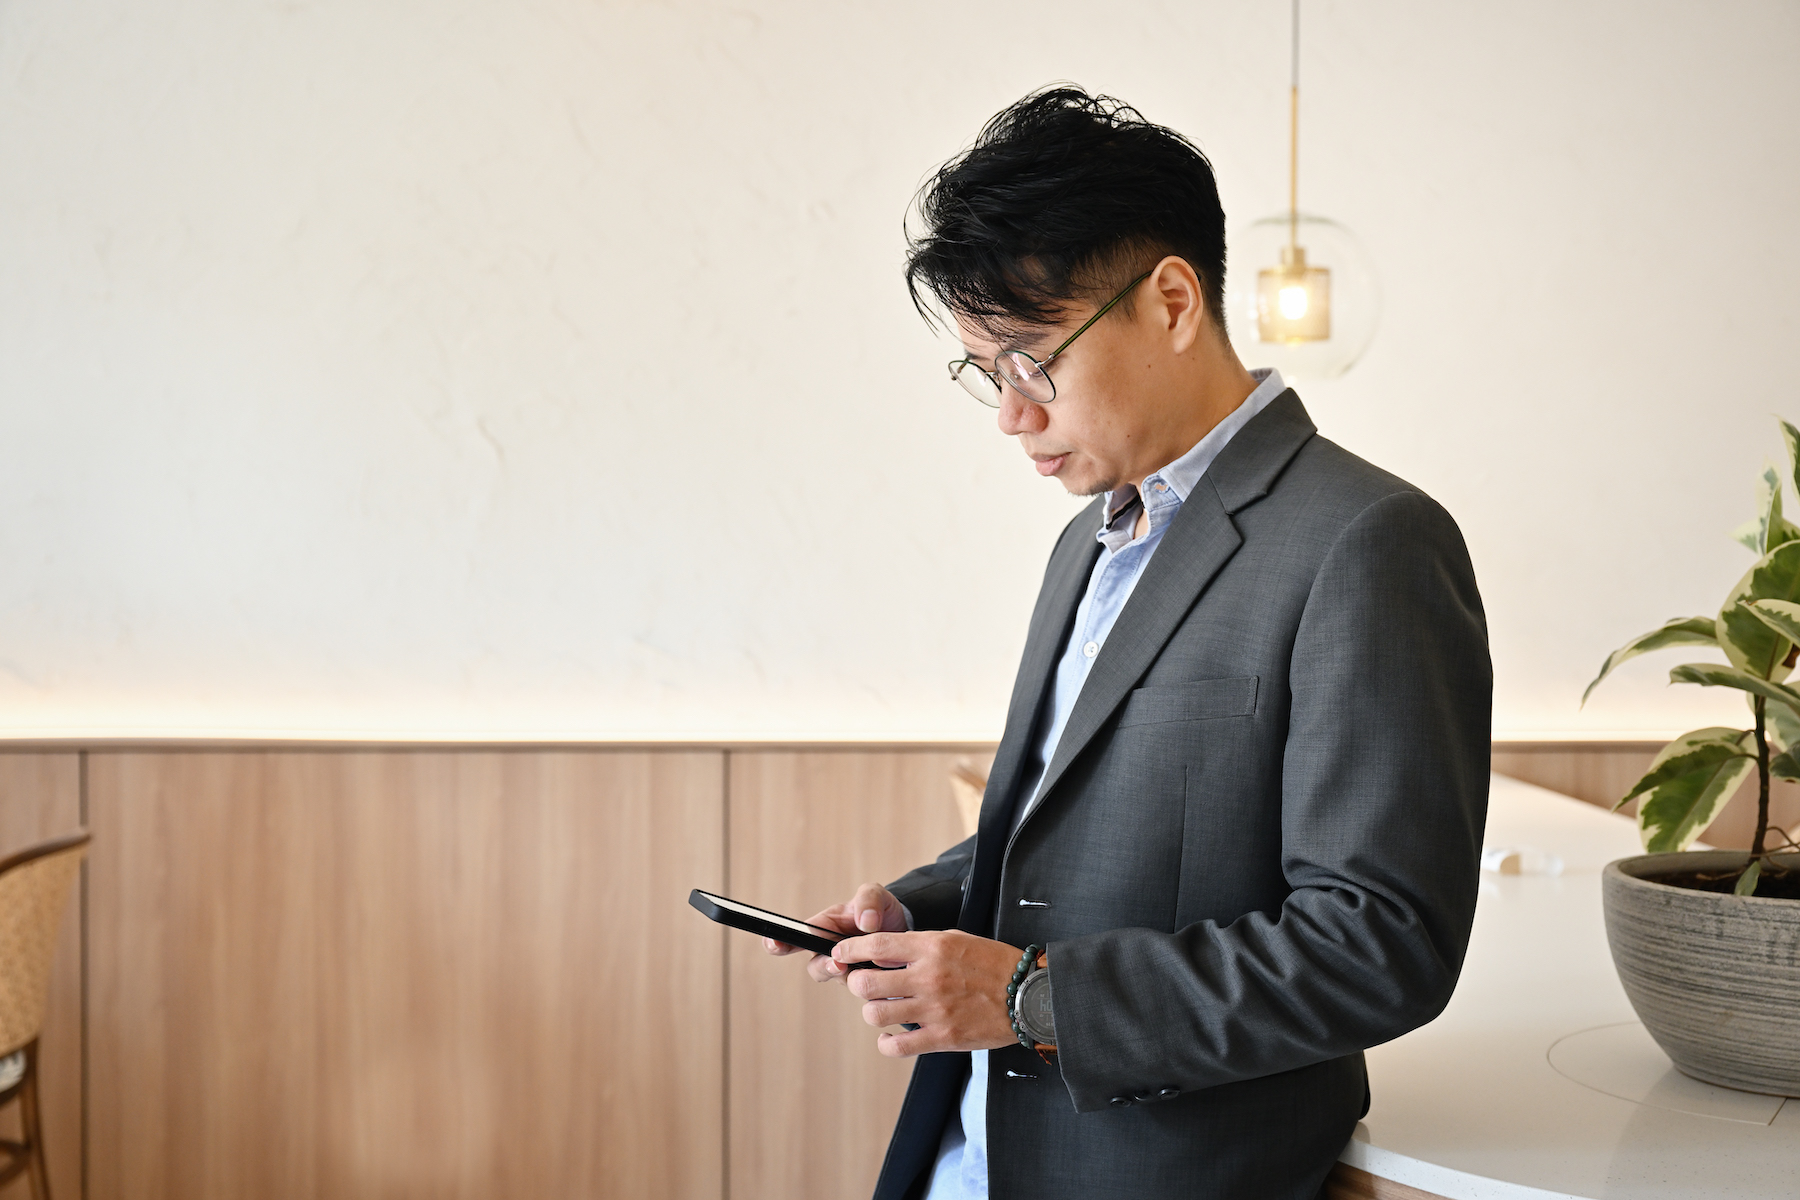 A man dressed in business attire looks down at his phone while he's waiting